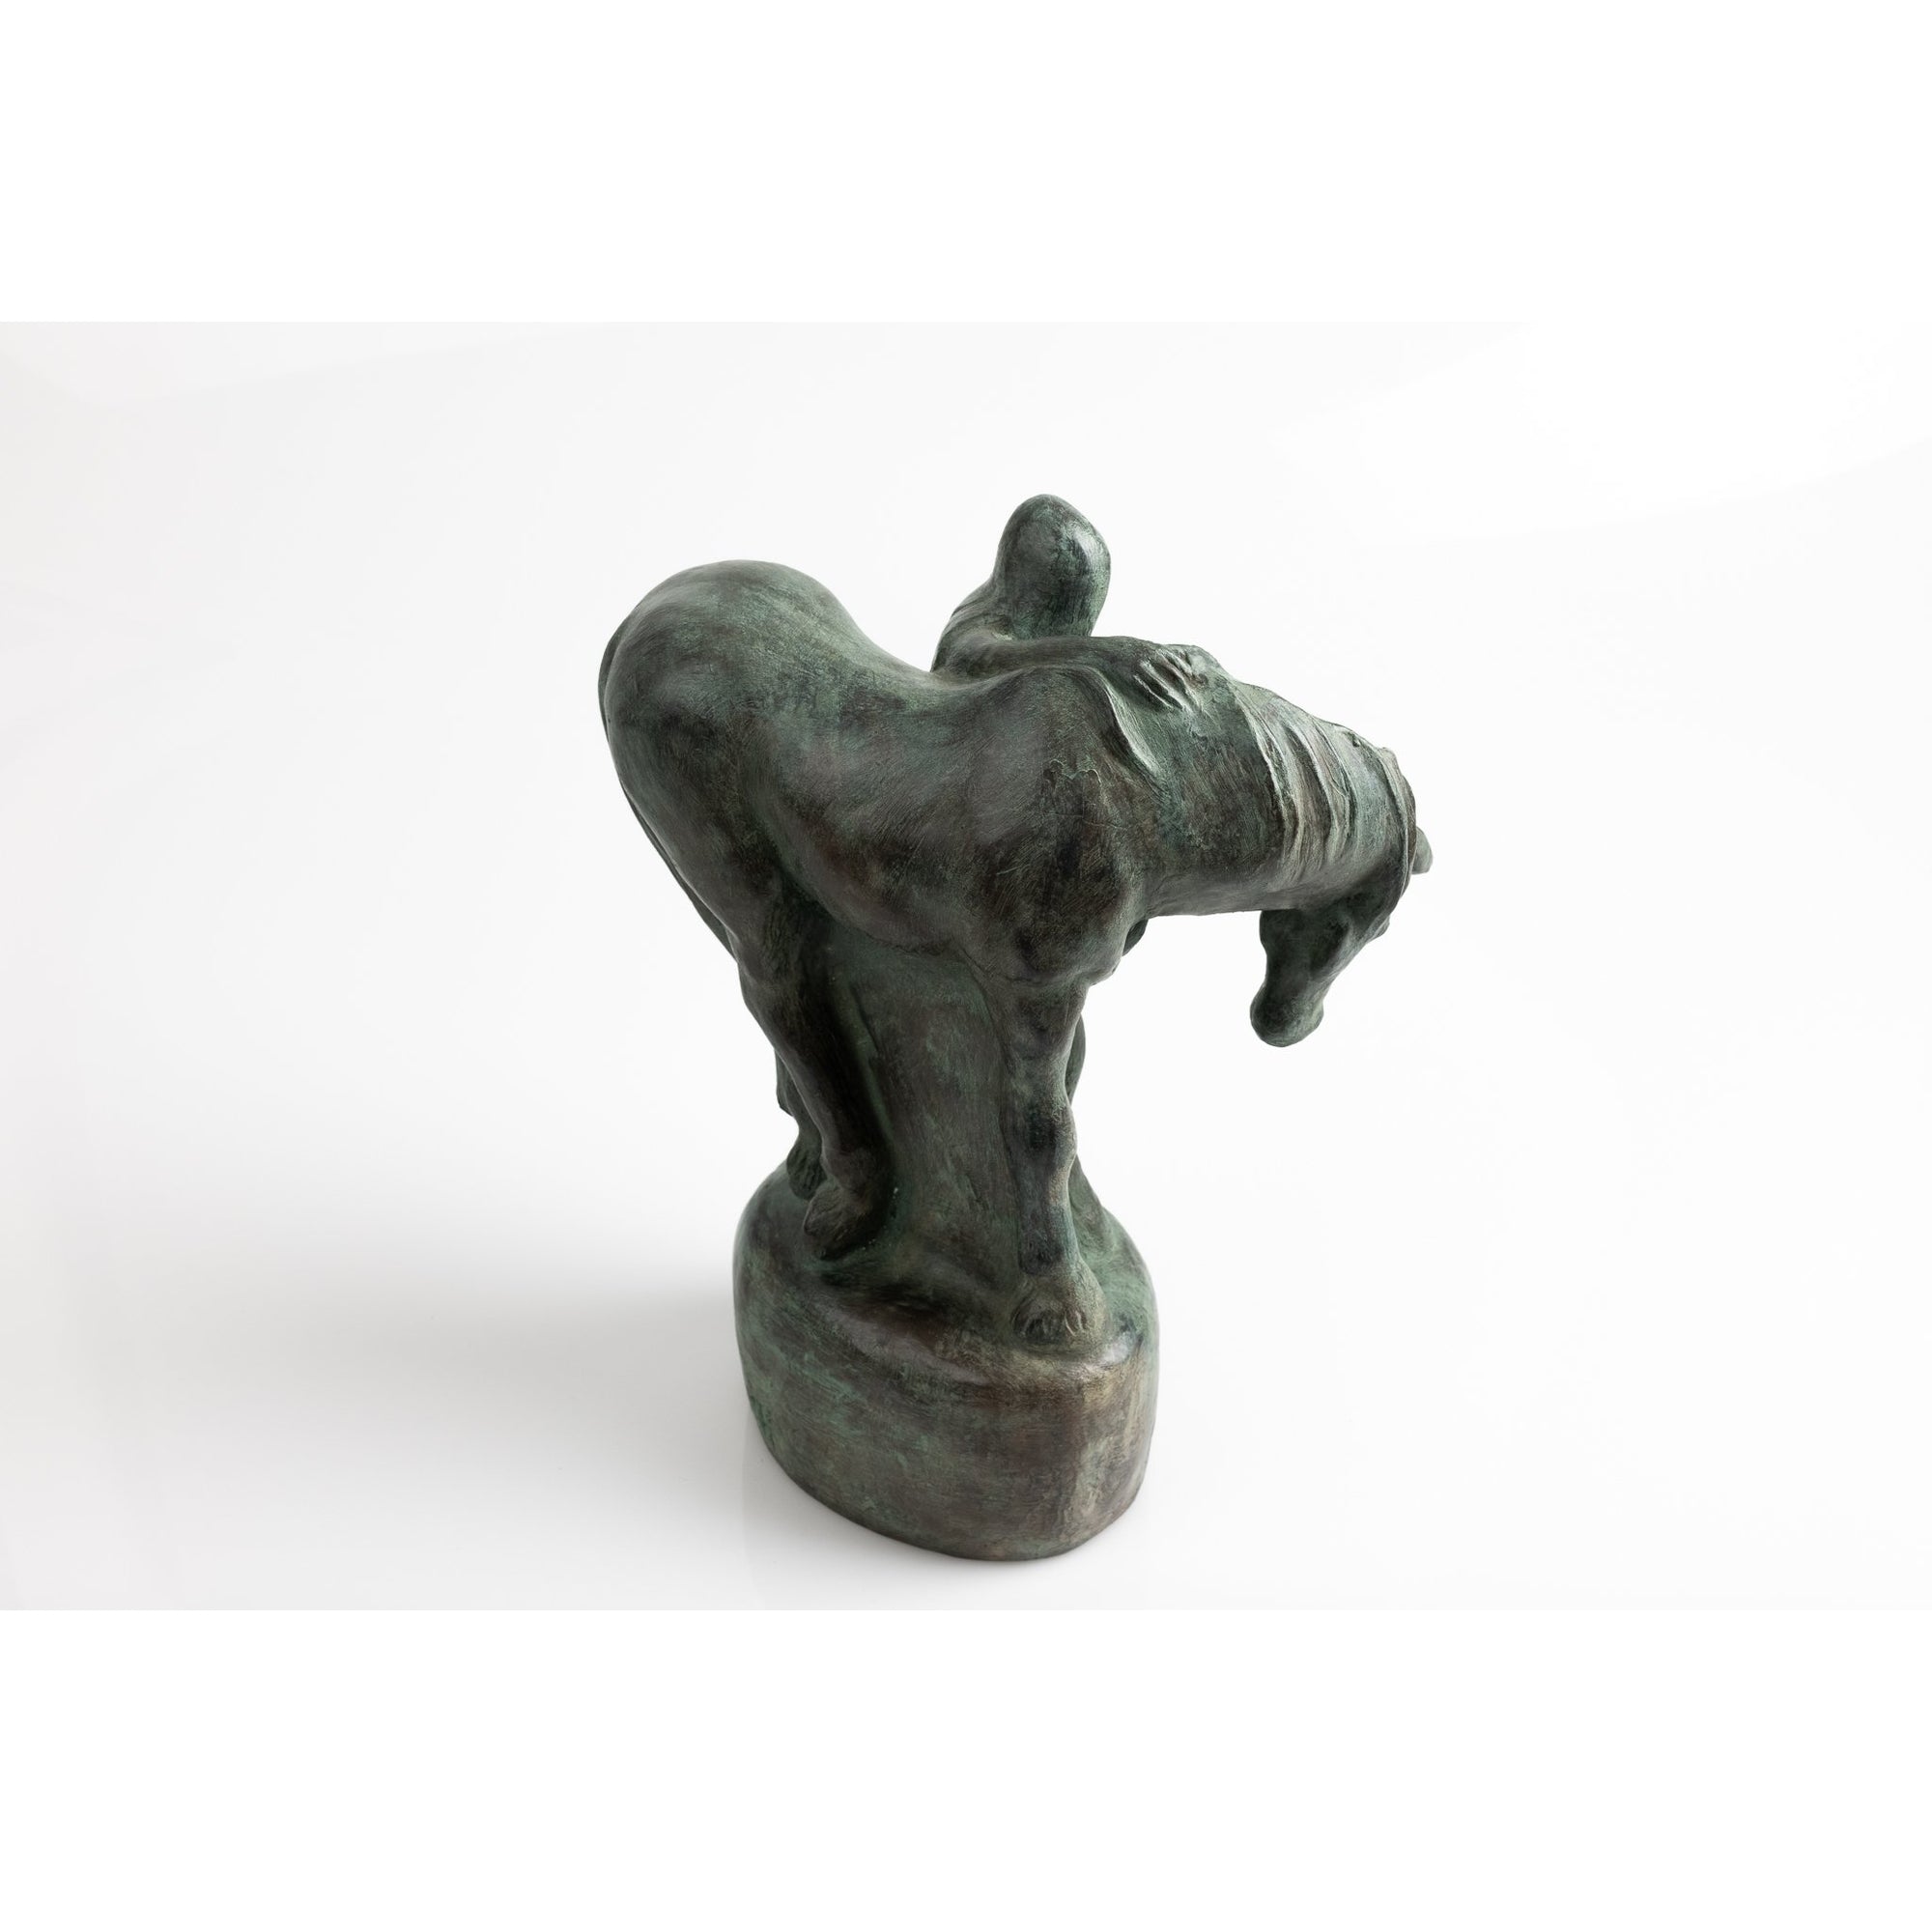 'Friends' limited edition sculpture by Sophie Howard, available at Padstow Gallery, Cornwall